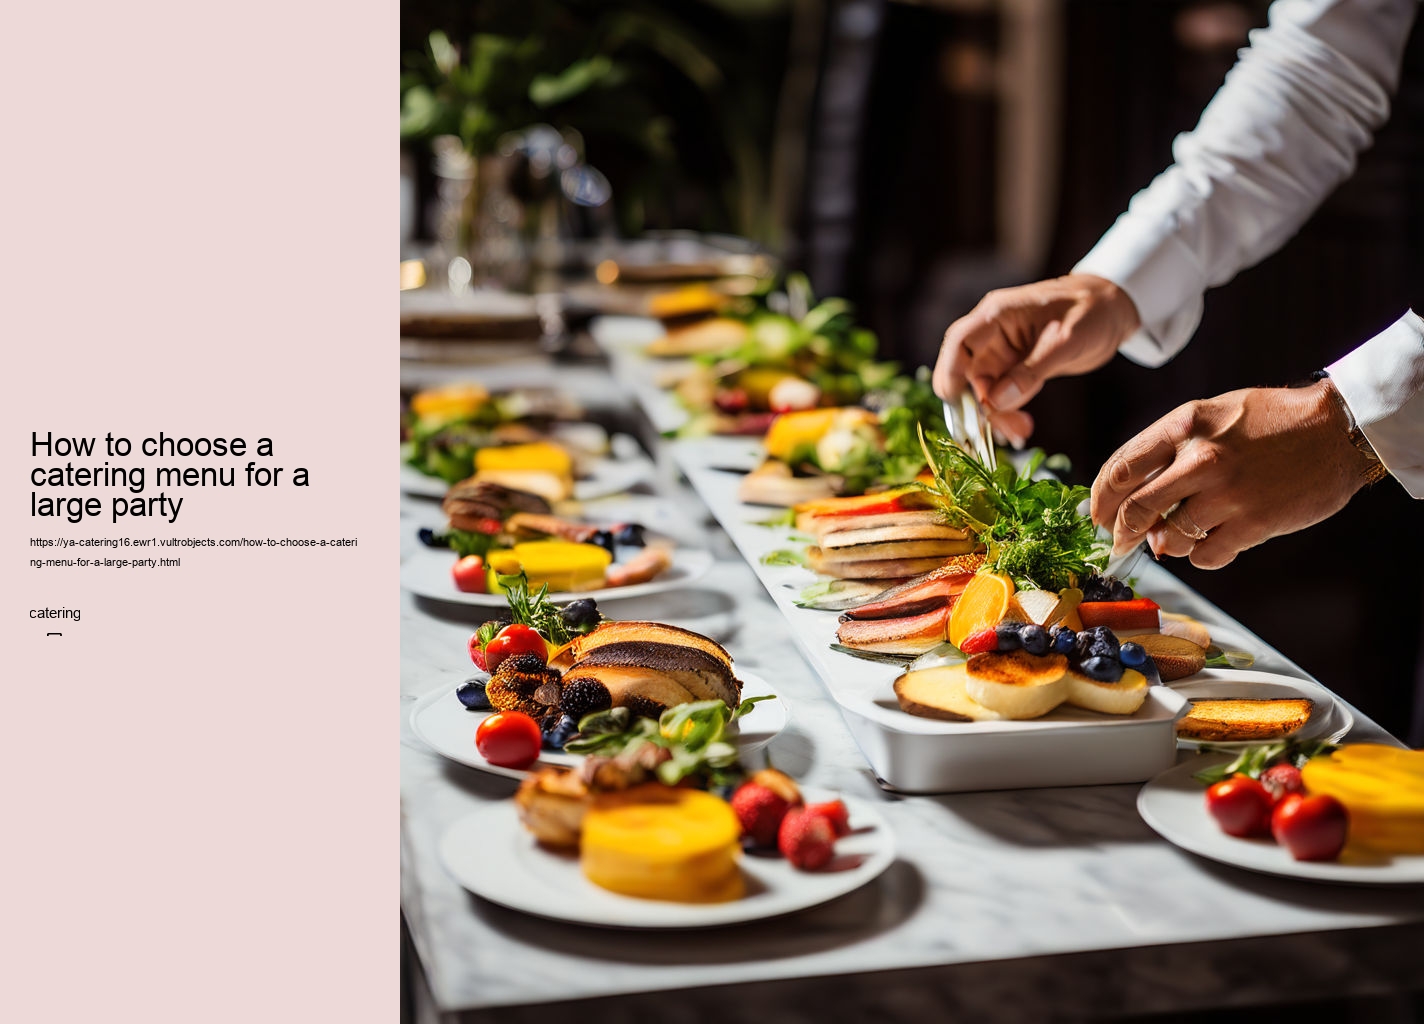 How to choose a catering menu for a large party